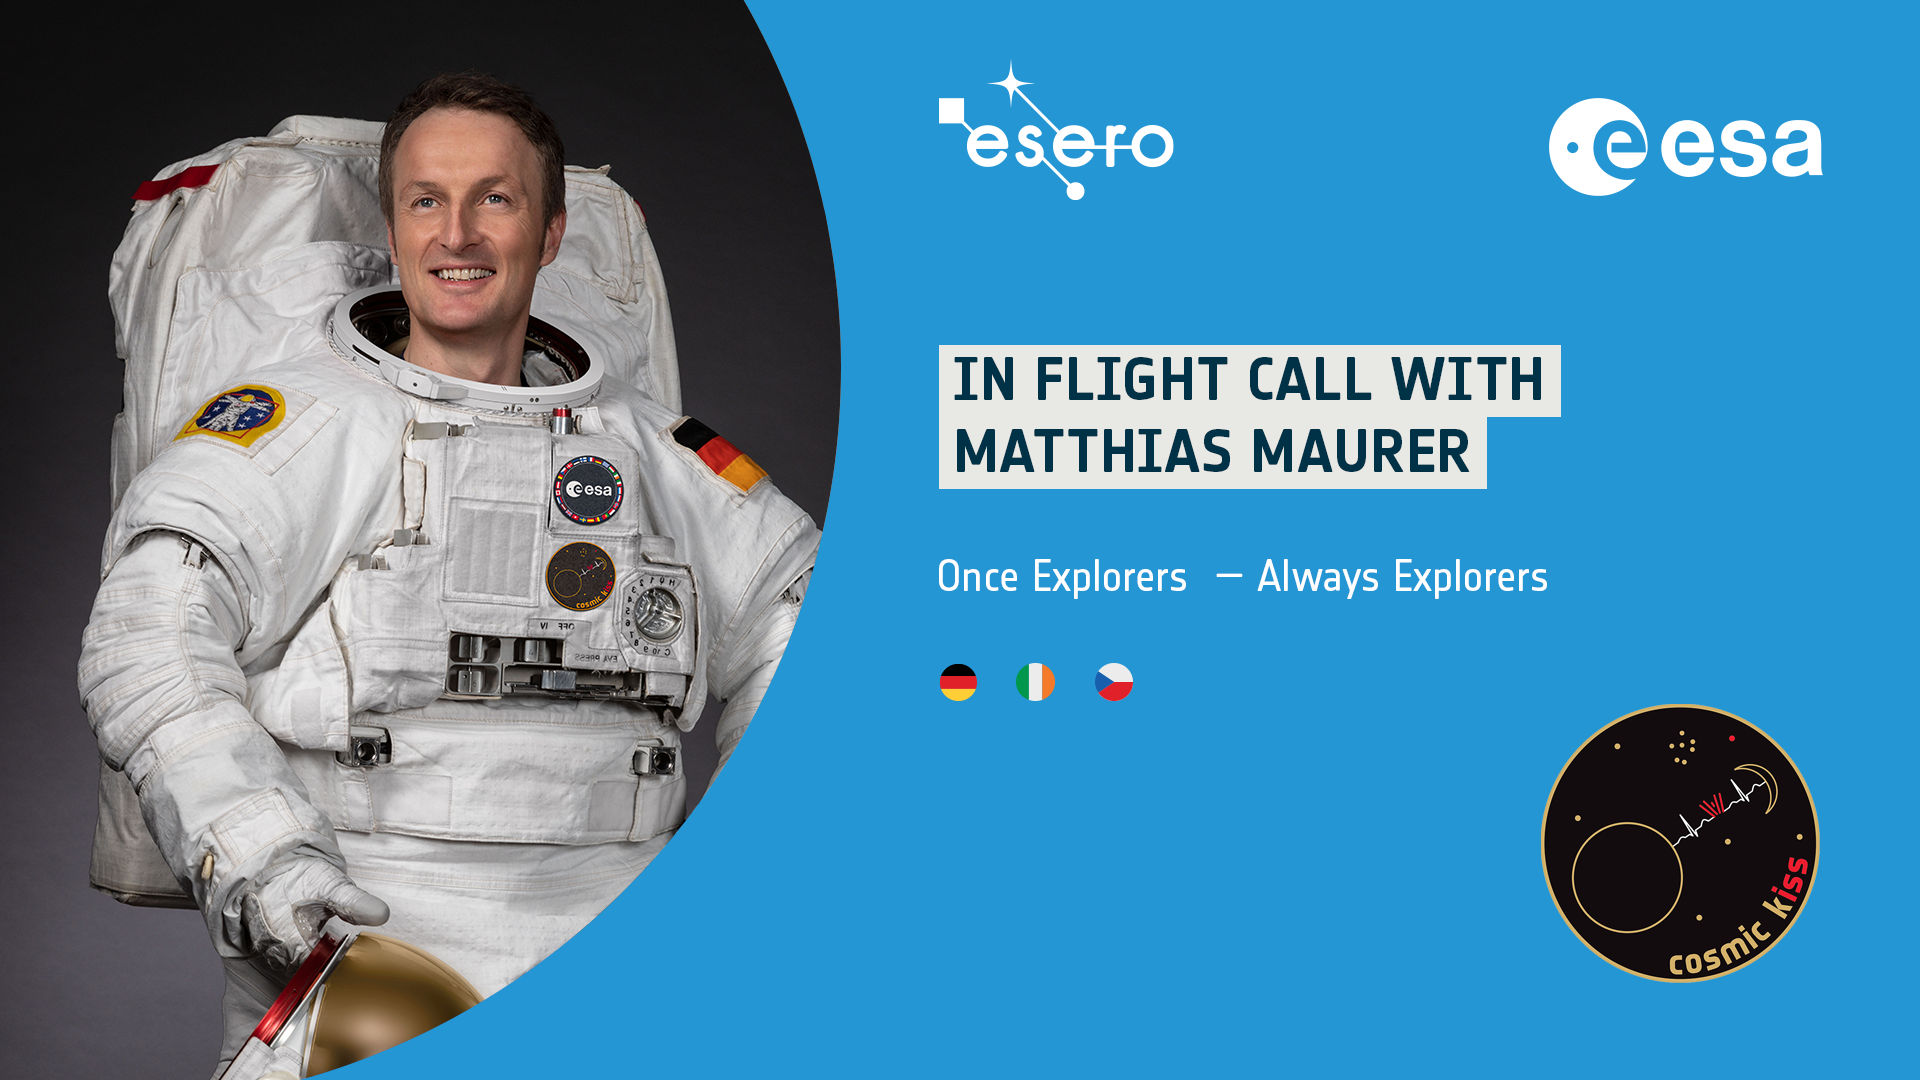 In flight call with Matthias Maurer and ESEROs Germany, Ireland and Czech Republic